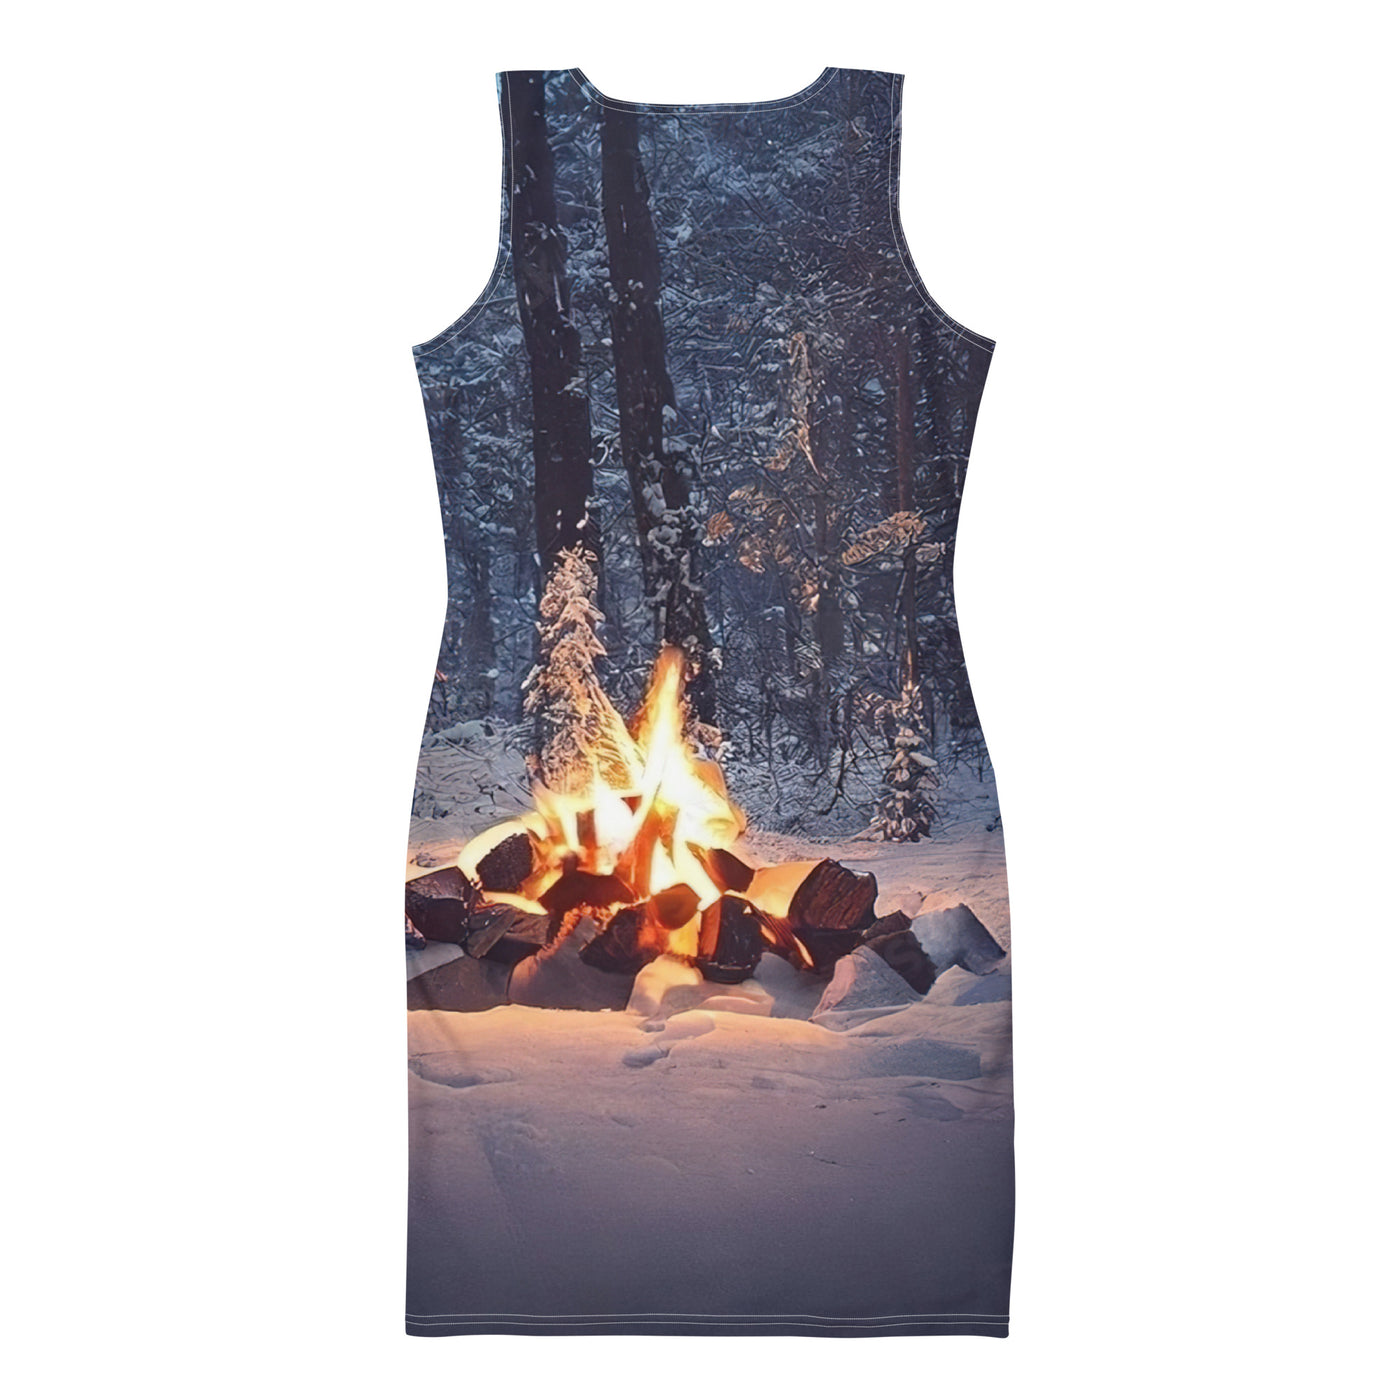 Lagerfeuer im Winter - Camping Foto - Langes Damen Kleid (All-Over Print) camping xxx